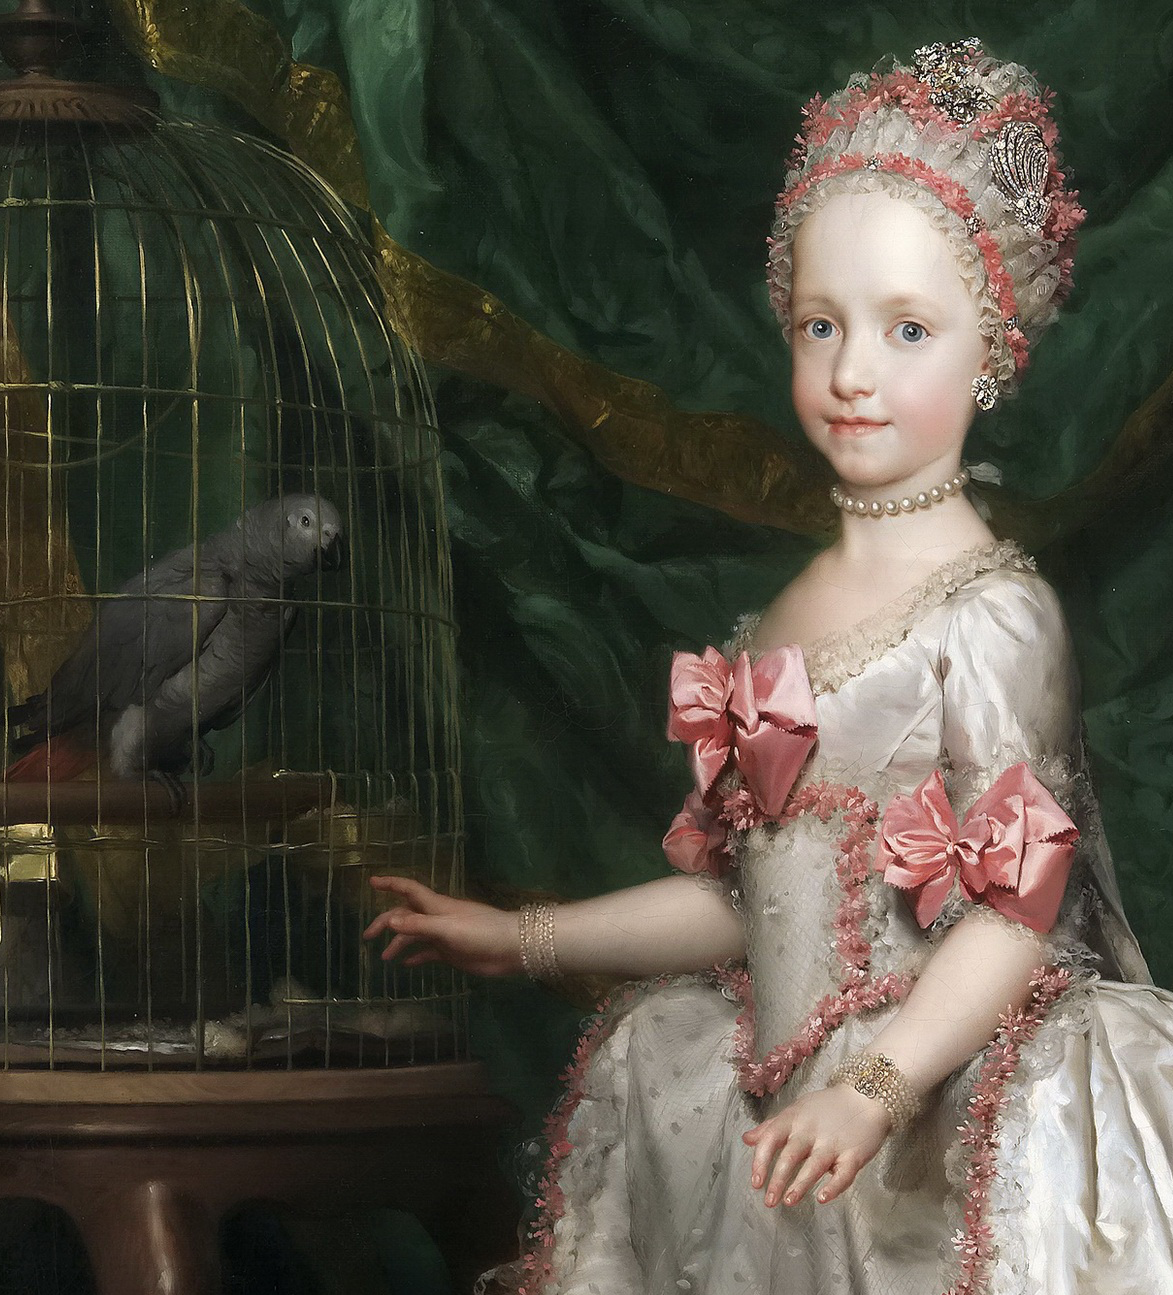 Three-year-old Archduchess María Teresa of Austria (niece of Marie Antoinette) with her caged parrot by Anton Rafael Mengs, 1771. Museo del Prado. 